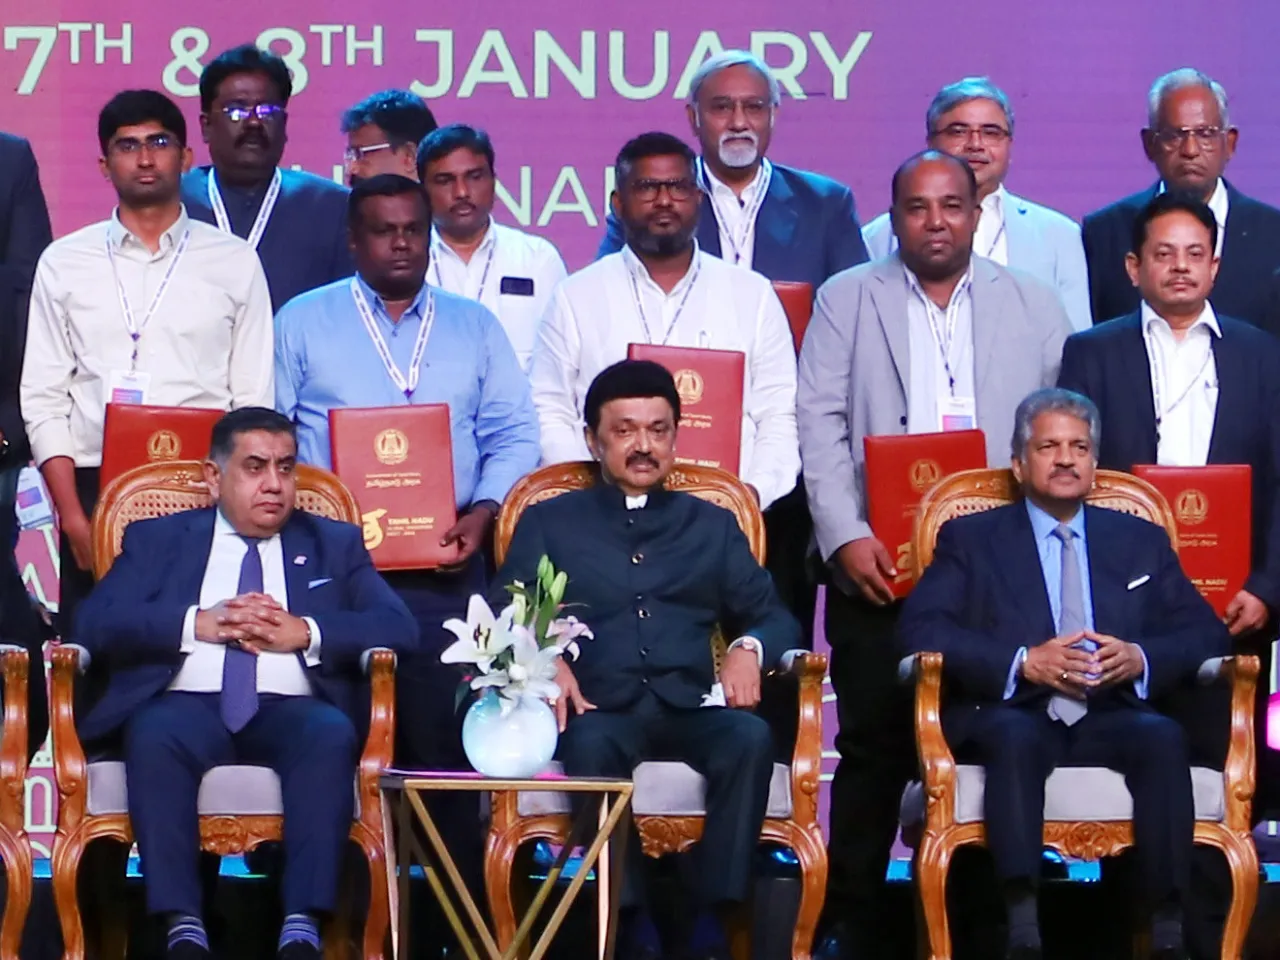 TechnoSport signs MoU with Tamil Nadu Government to establish activewear factory in Erode